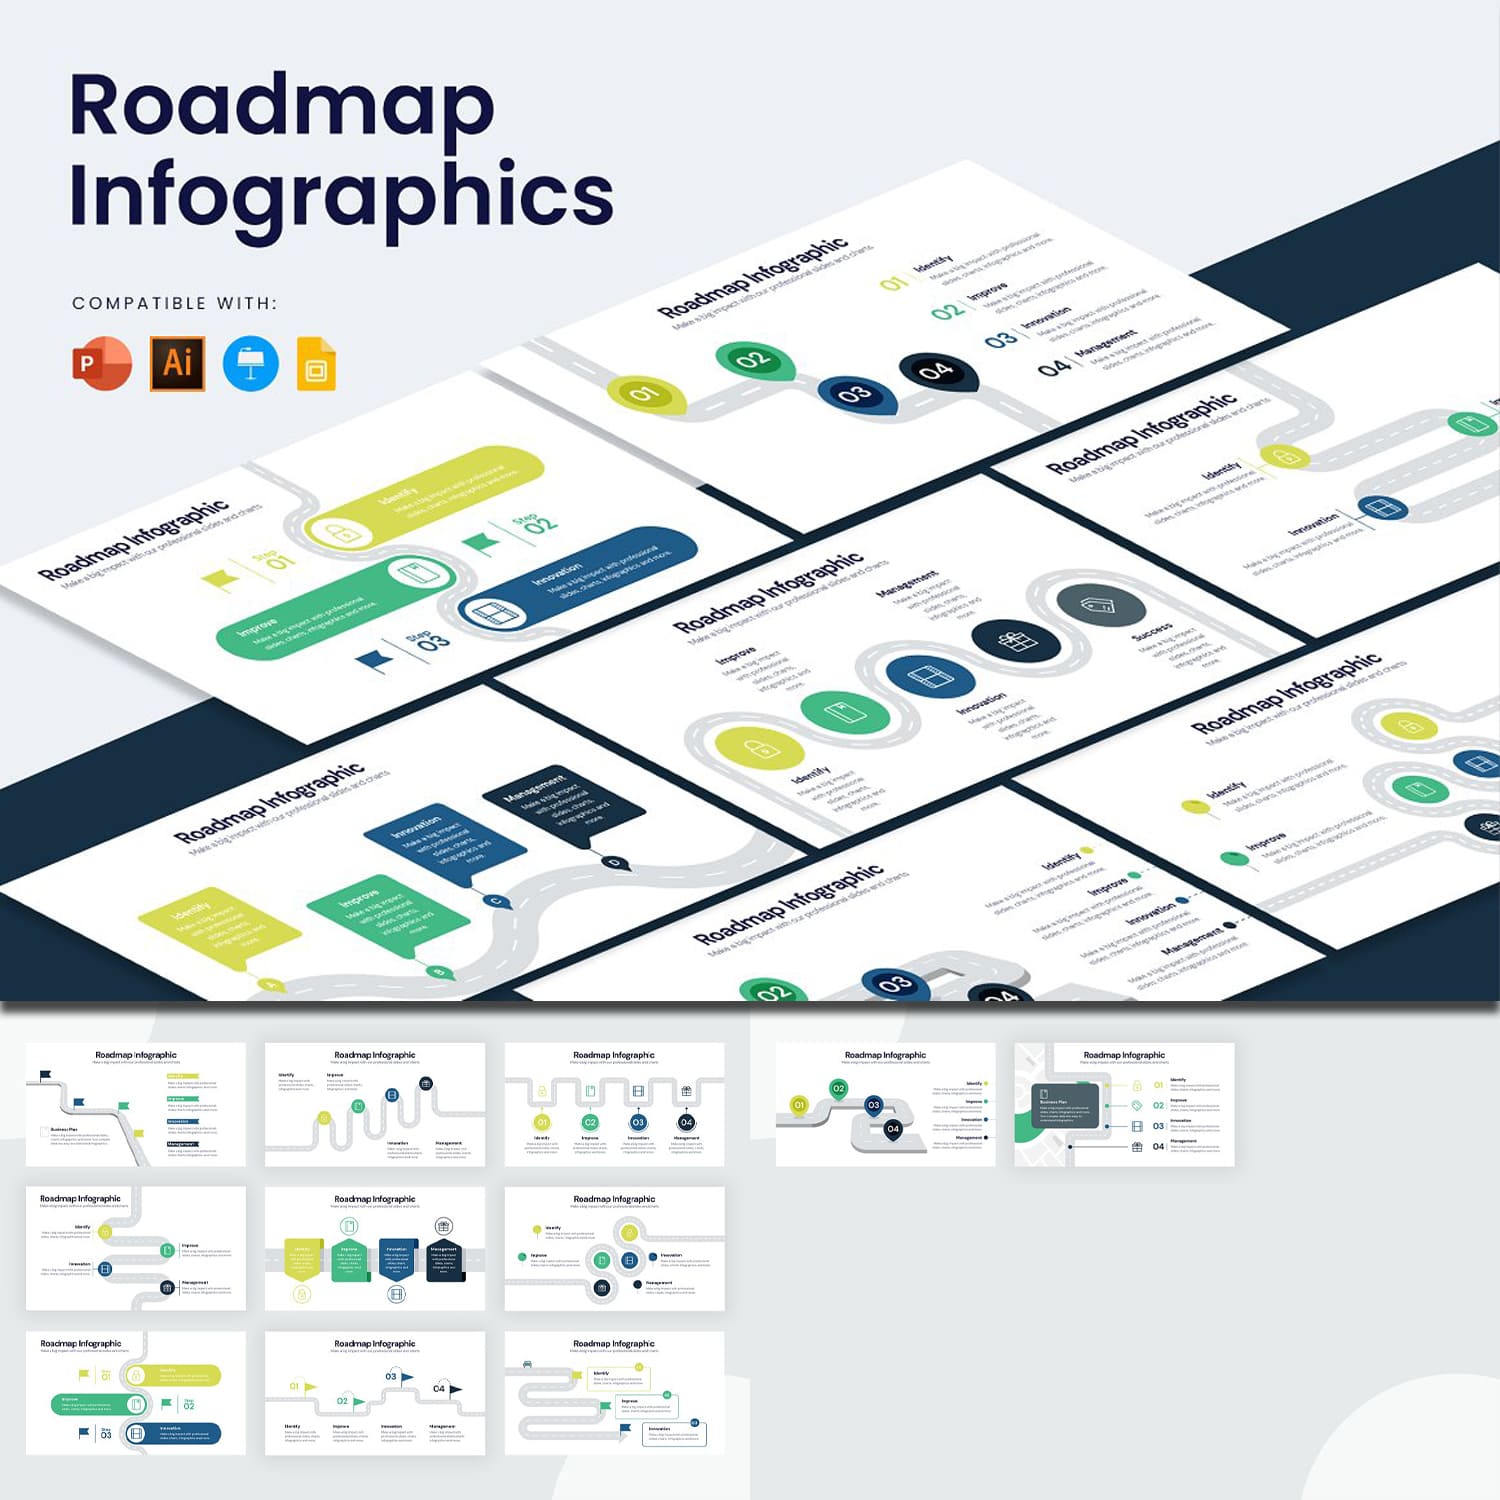 Roadmap Infographics cover image.